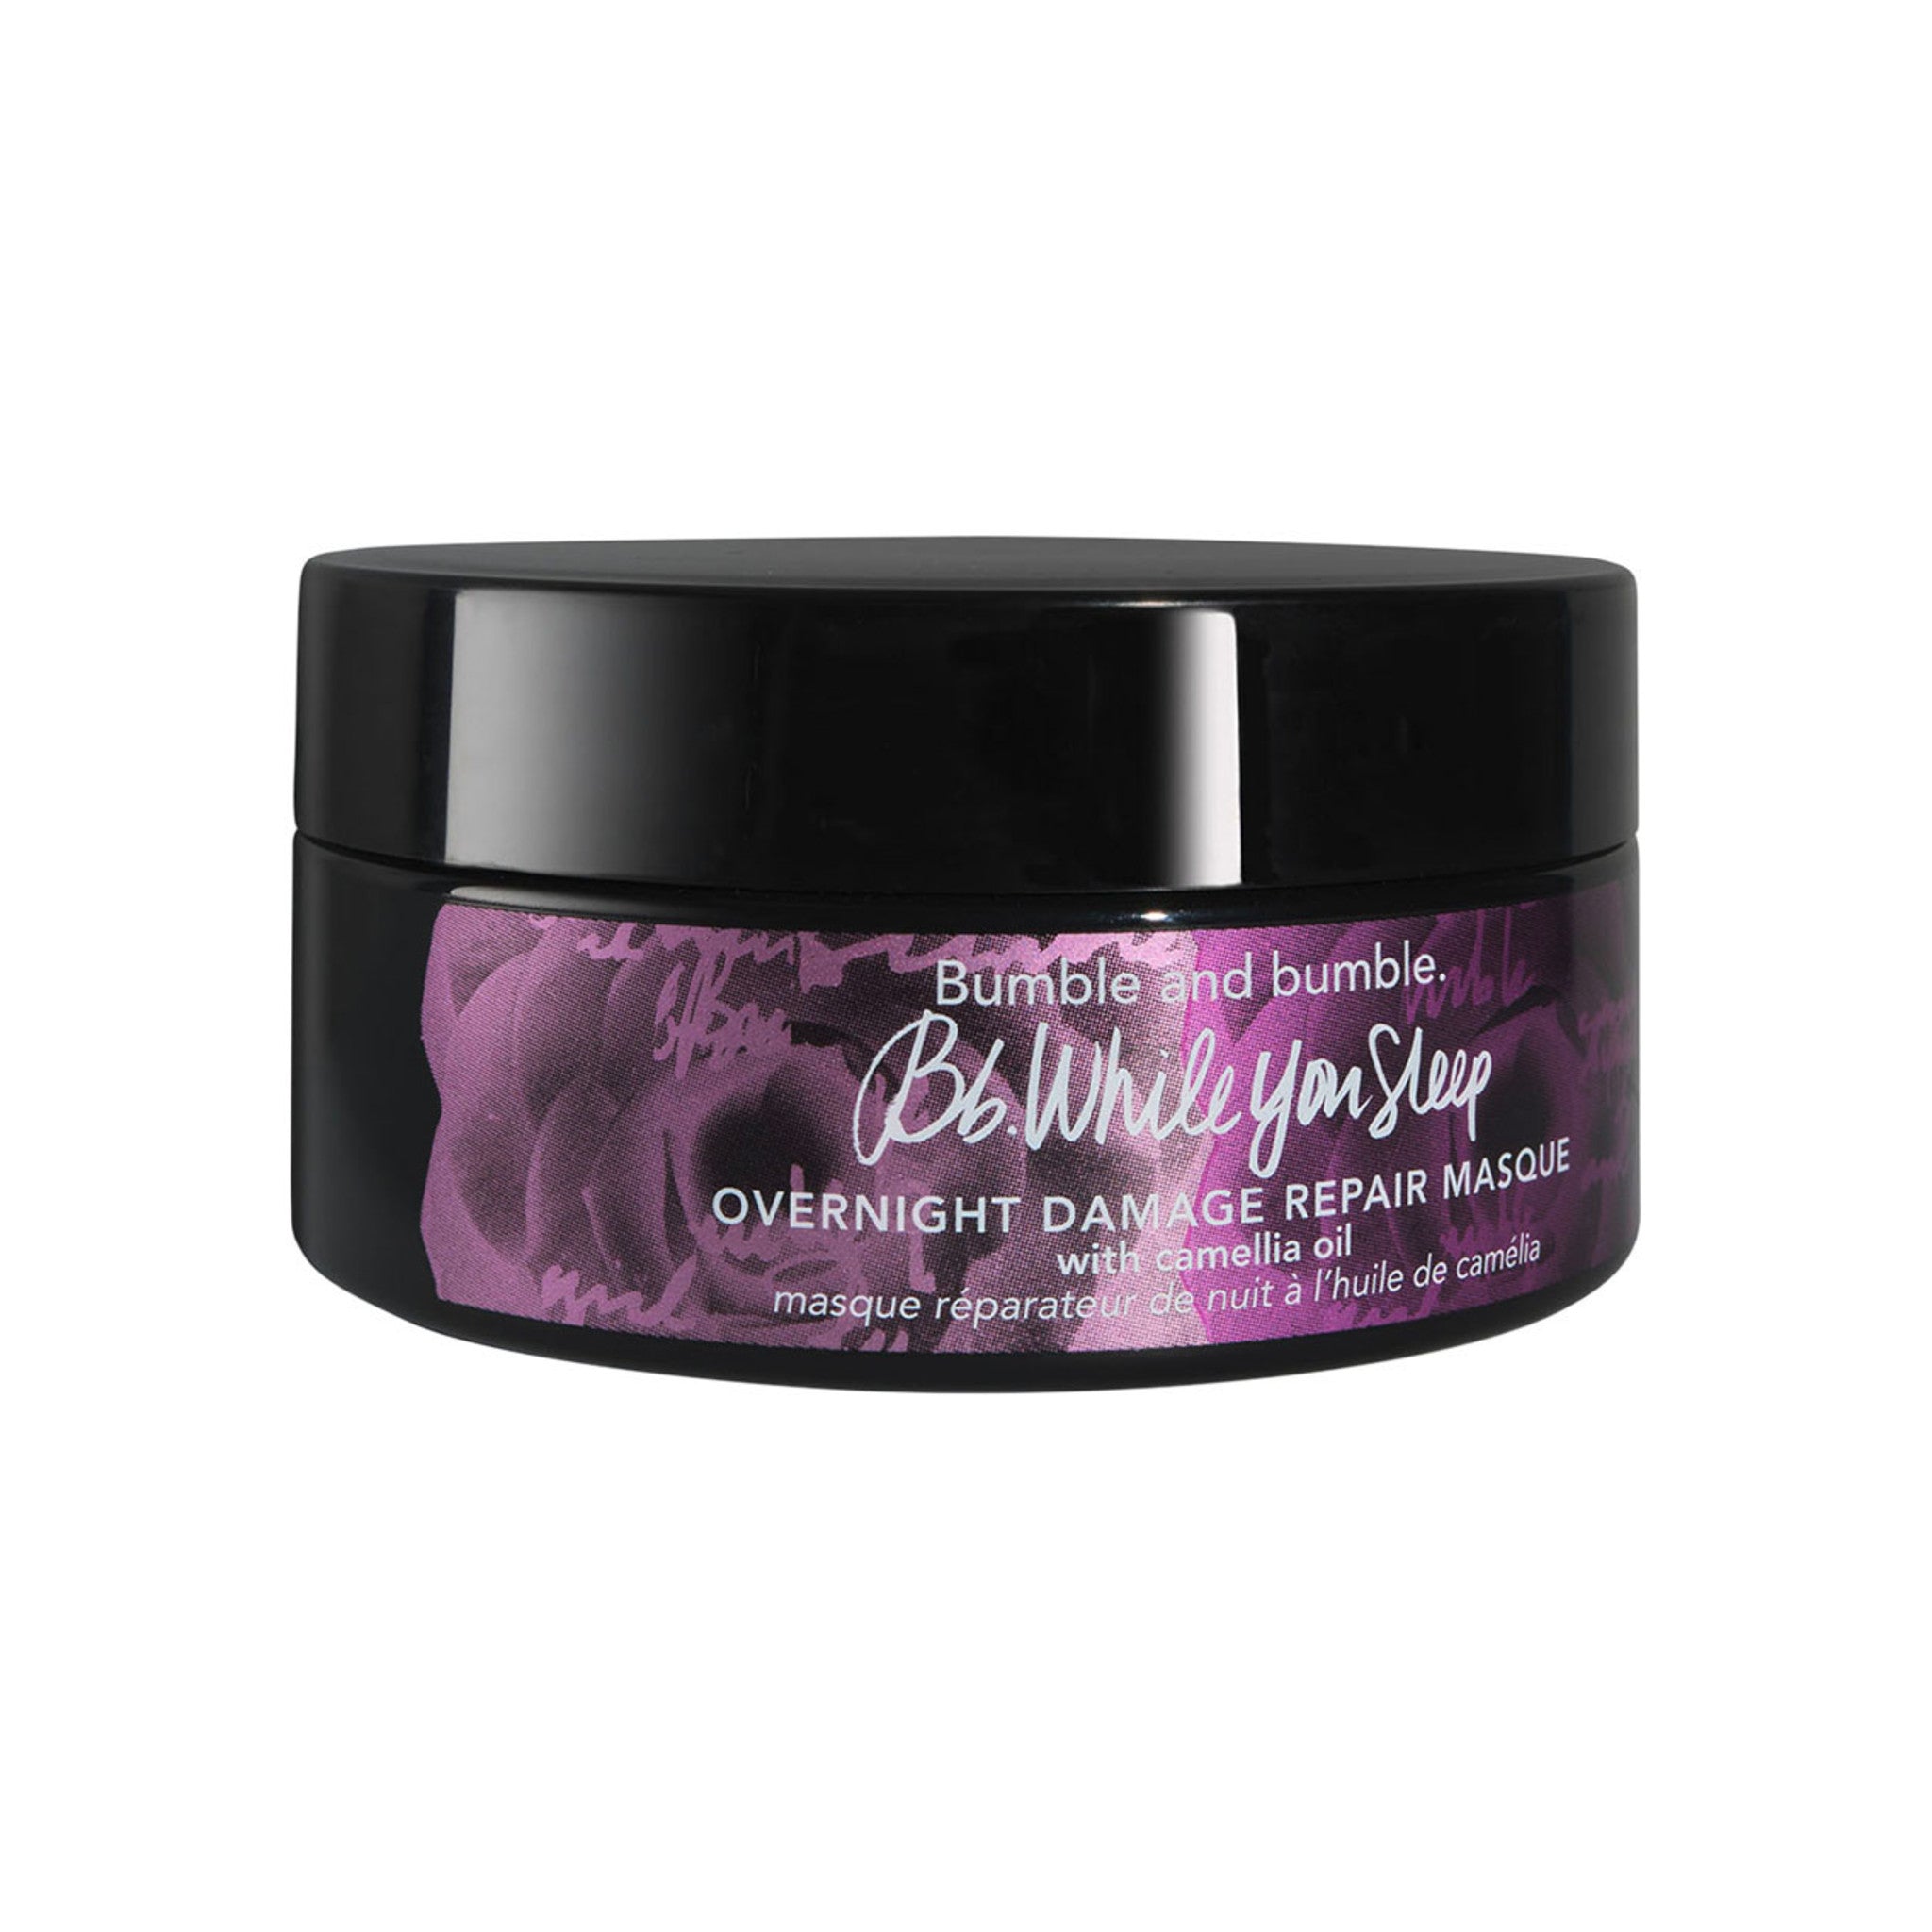 Bumble and Bumble While You Sleep Overnight Damage Repair Masque main image.